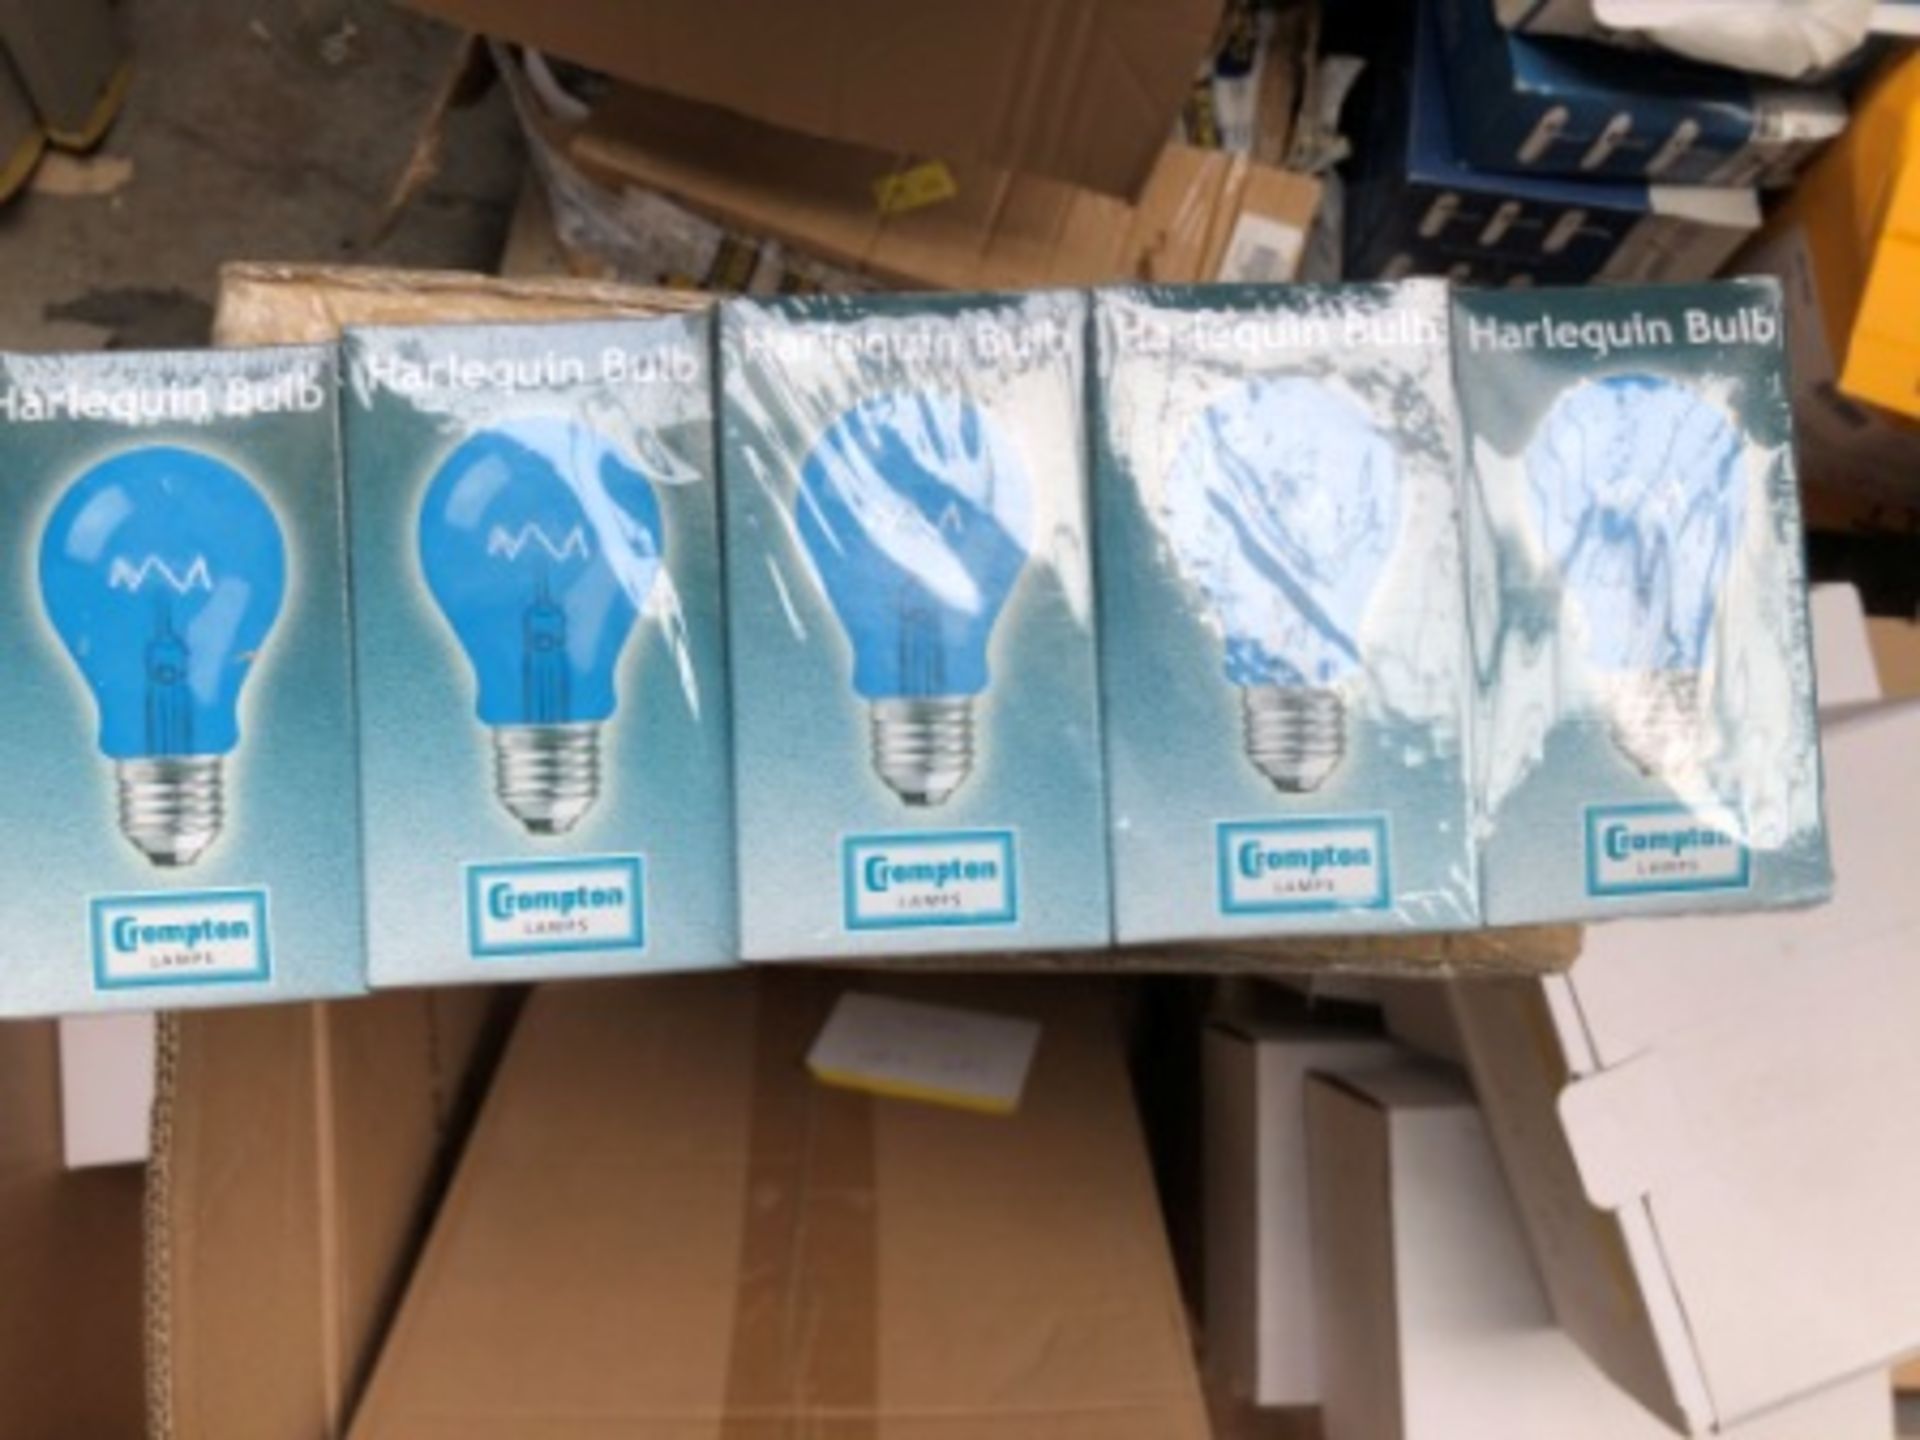 10X CROMPTON TRANSLUCENT BLUE ES LAMPS 15W IDEAL FOR OUTDOORS